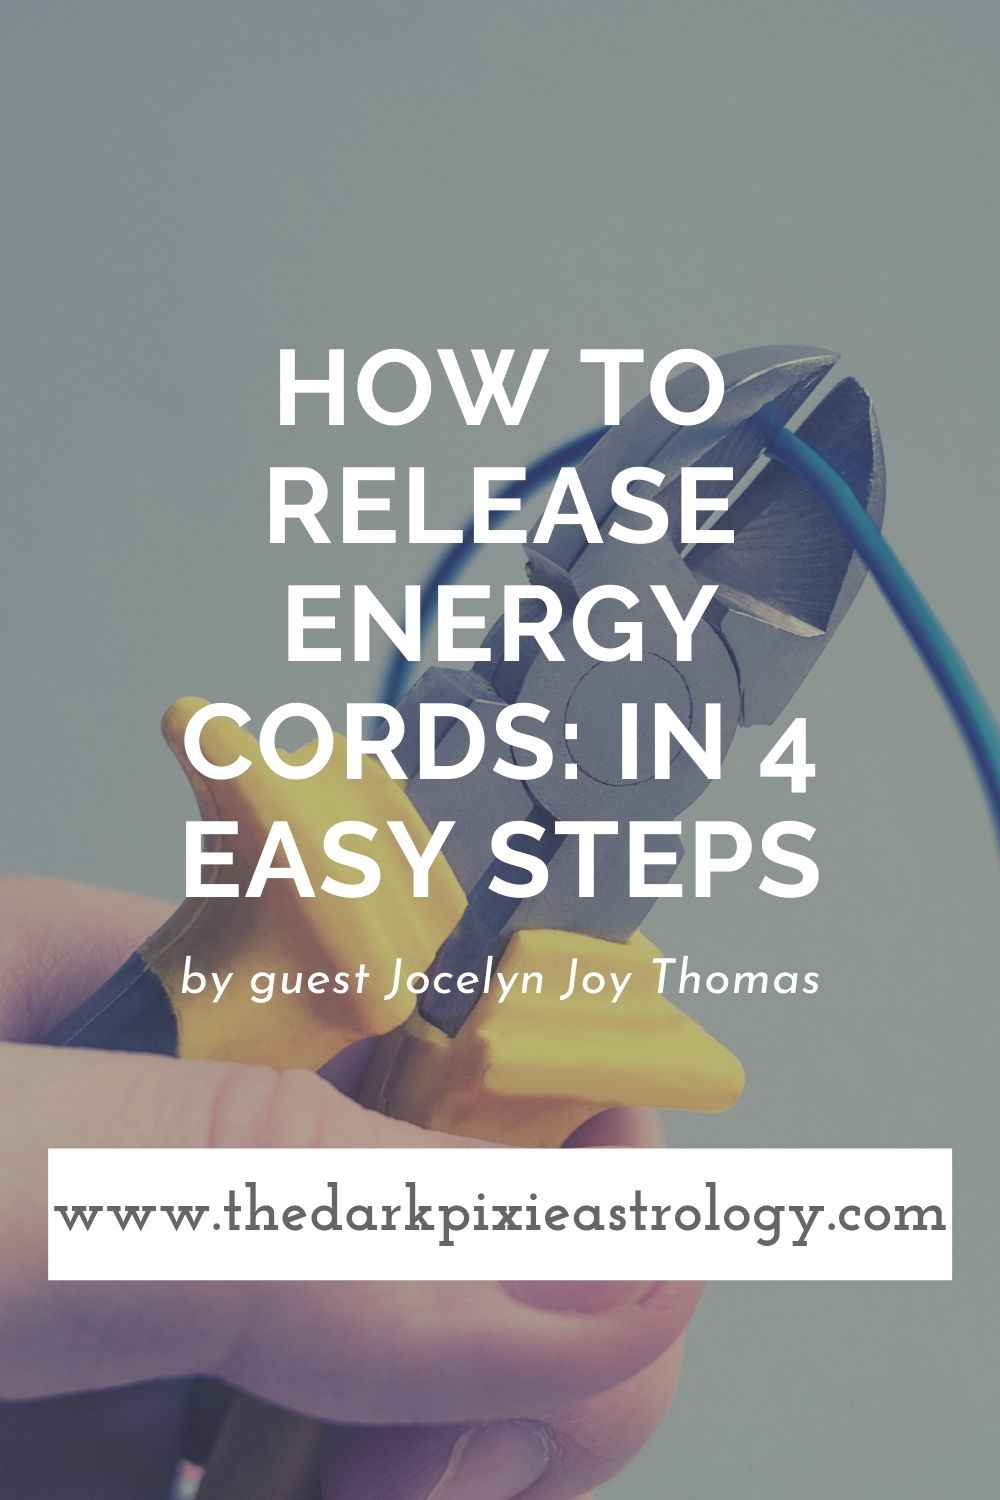 How to Release Energy Cords: In 4 Easy Steps - The Dark Pixie Astrology